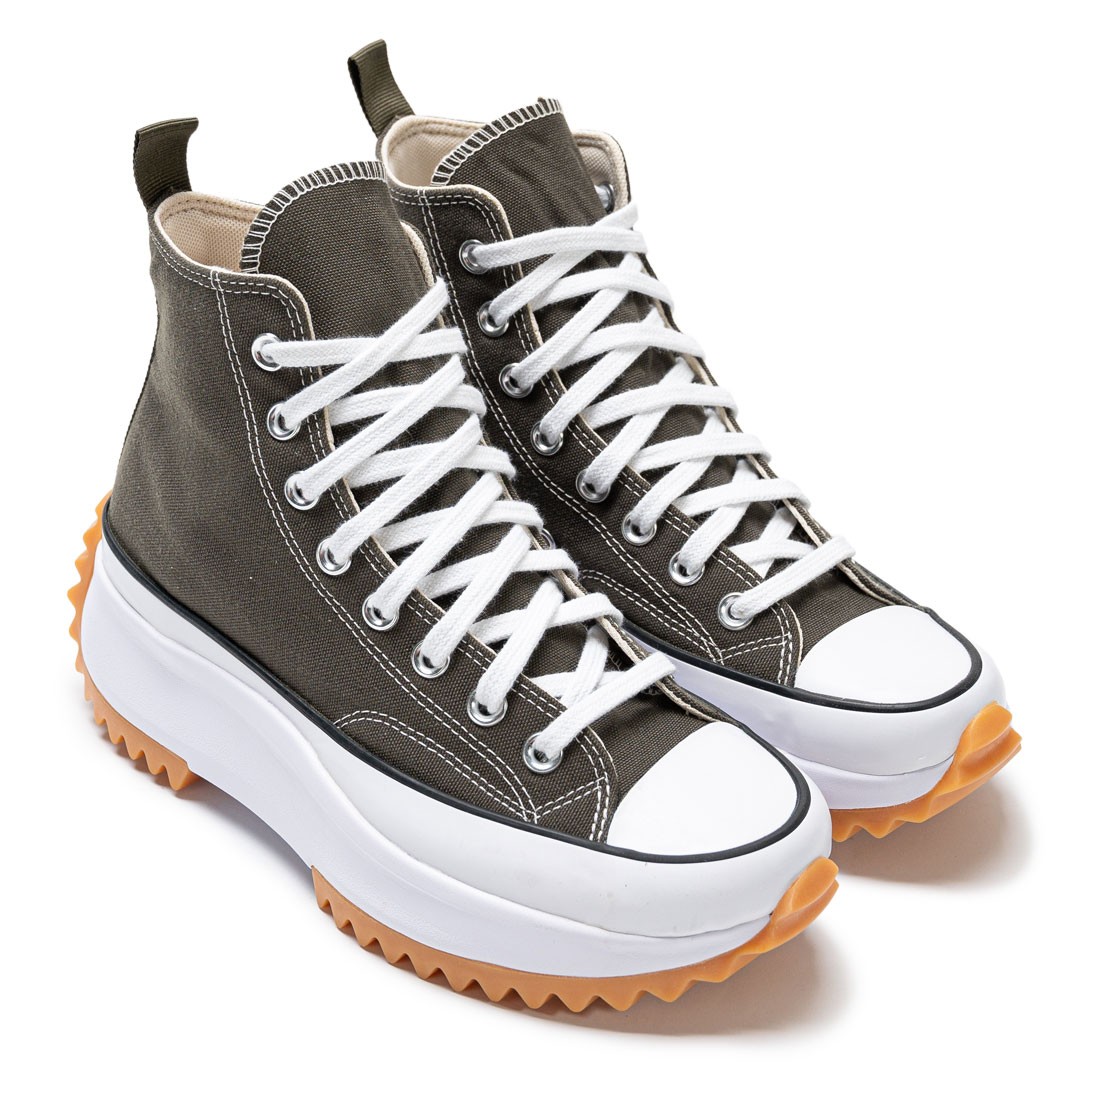 Converse has connected with London fashion brand JW Anderson to give the